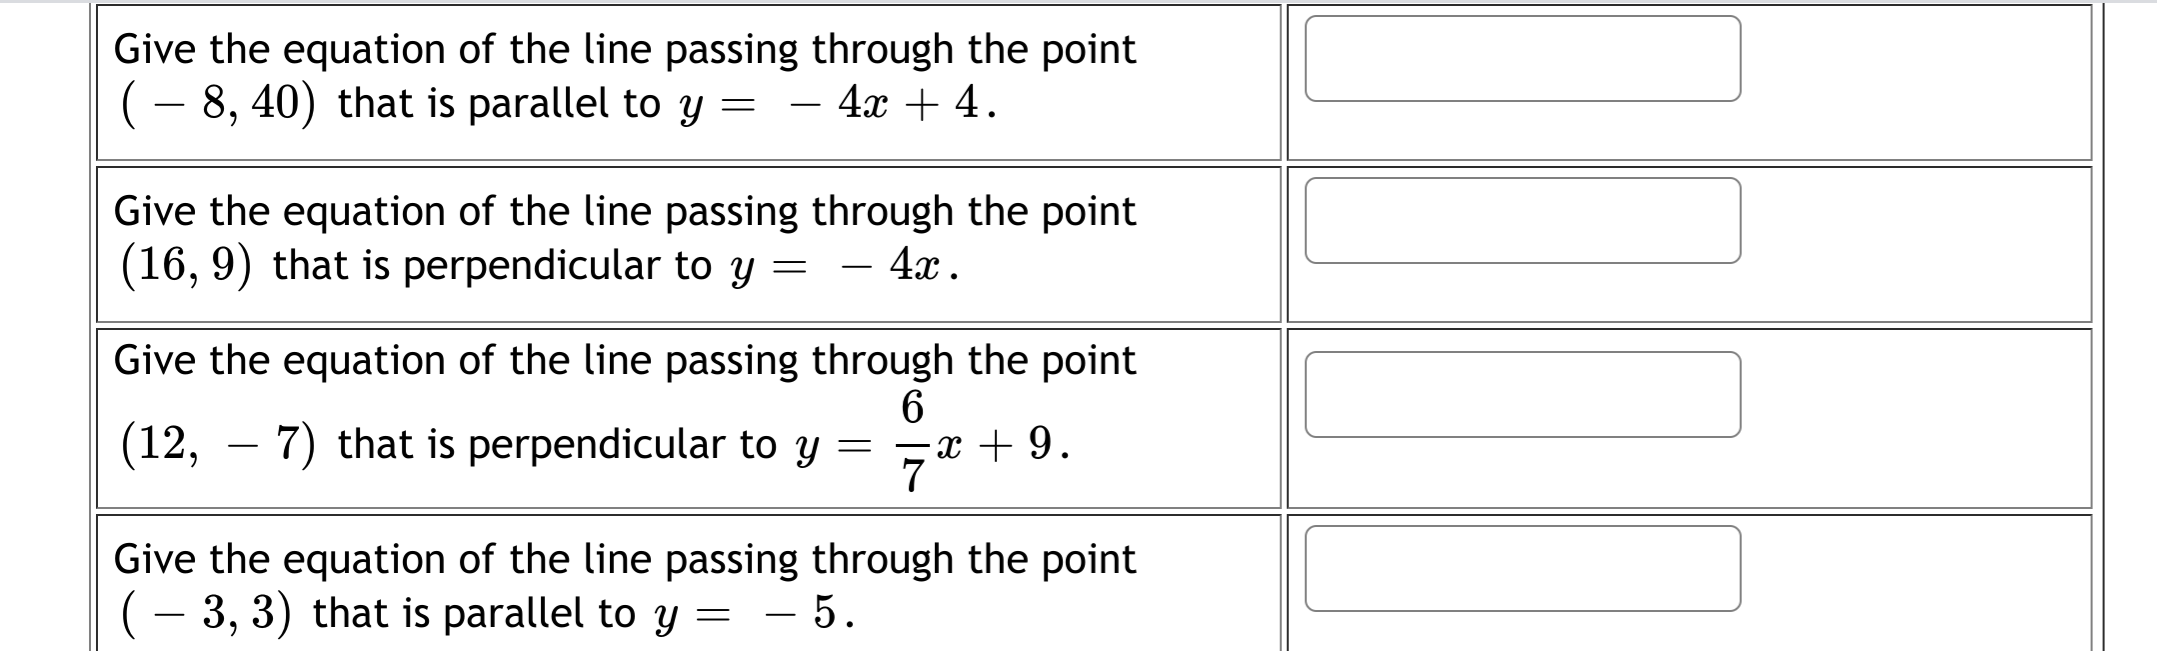 Give the equation of the line passing through the point
(- 8, 40) that is parallel to y = - 4x + 4.
